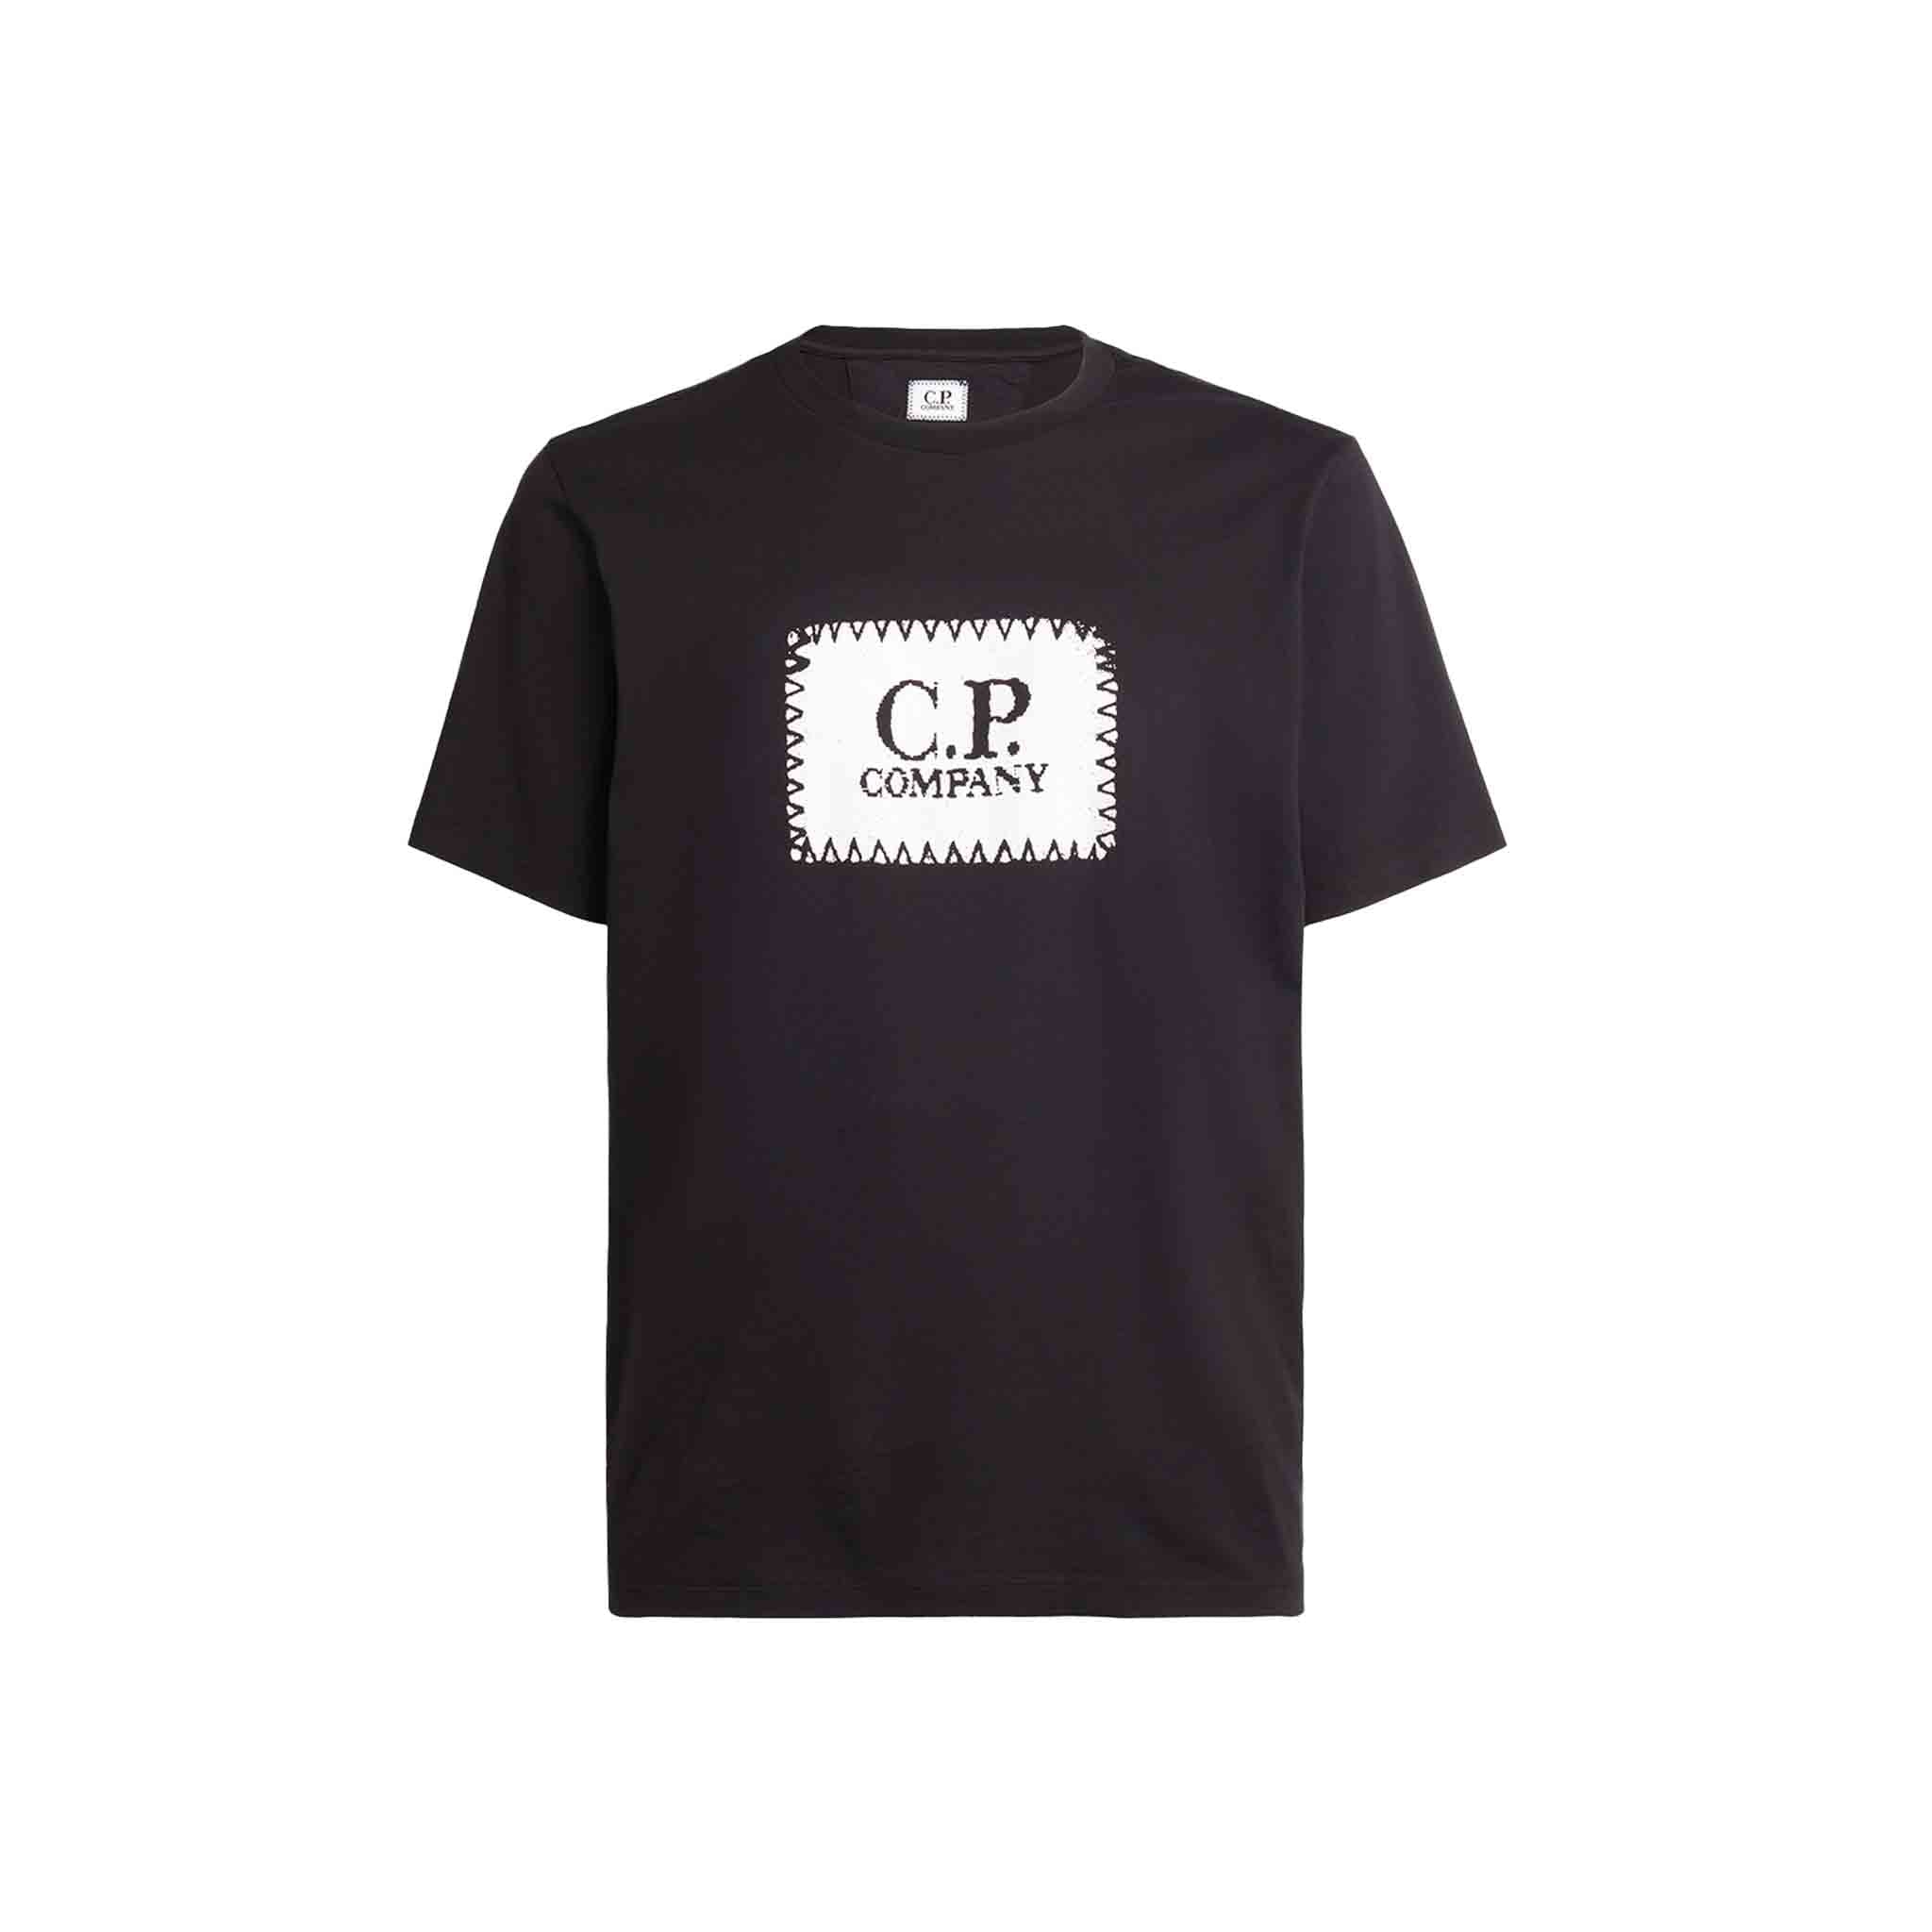 C.P. Company 30/1 Jersey Label T-shirt in Black